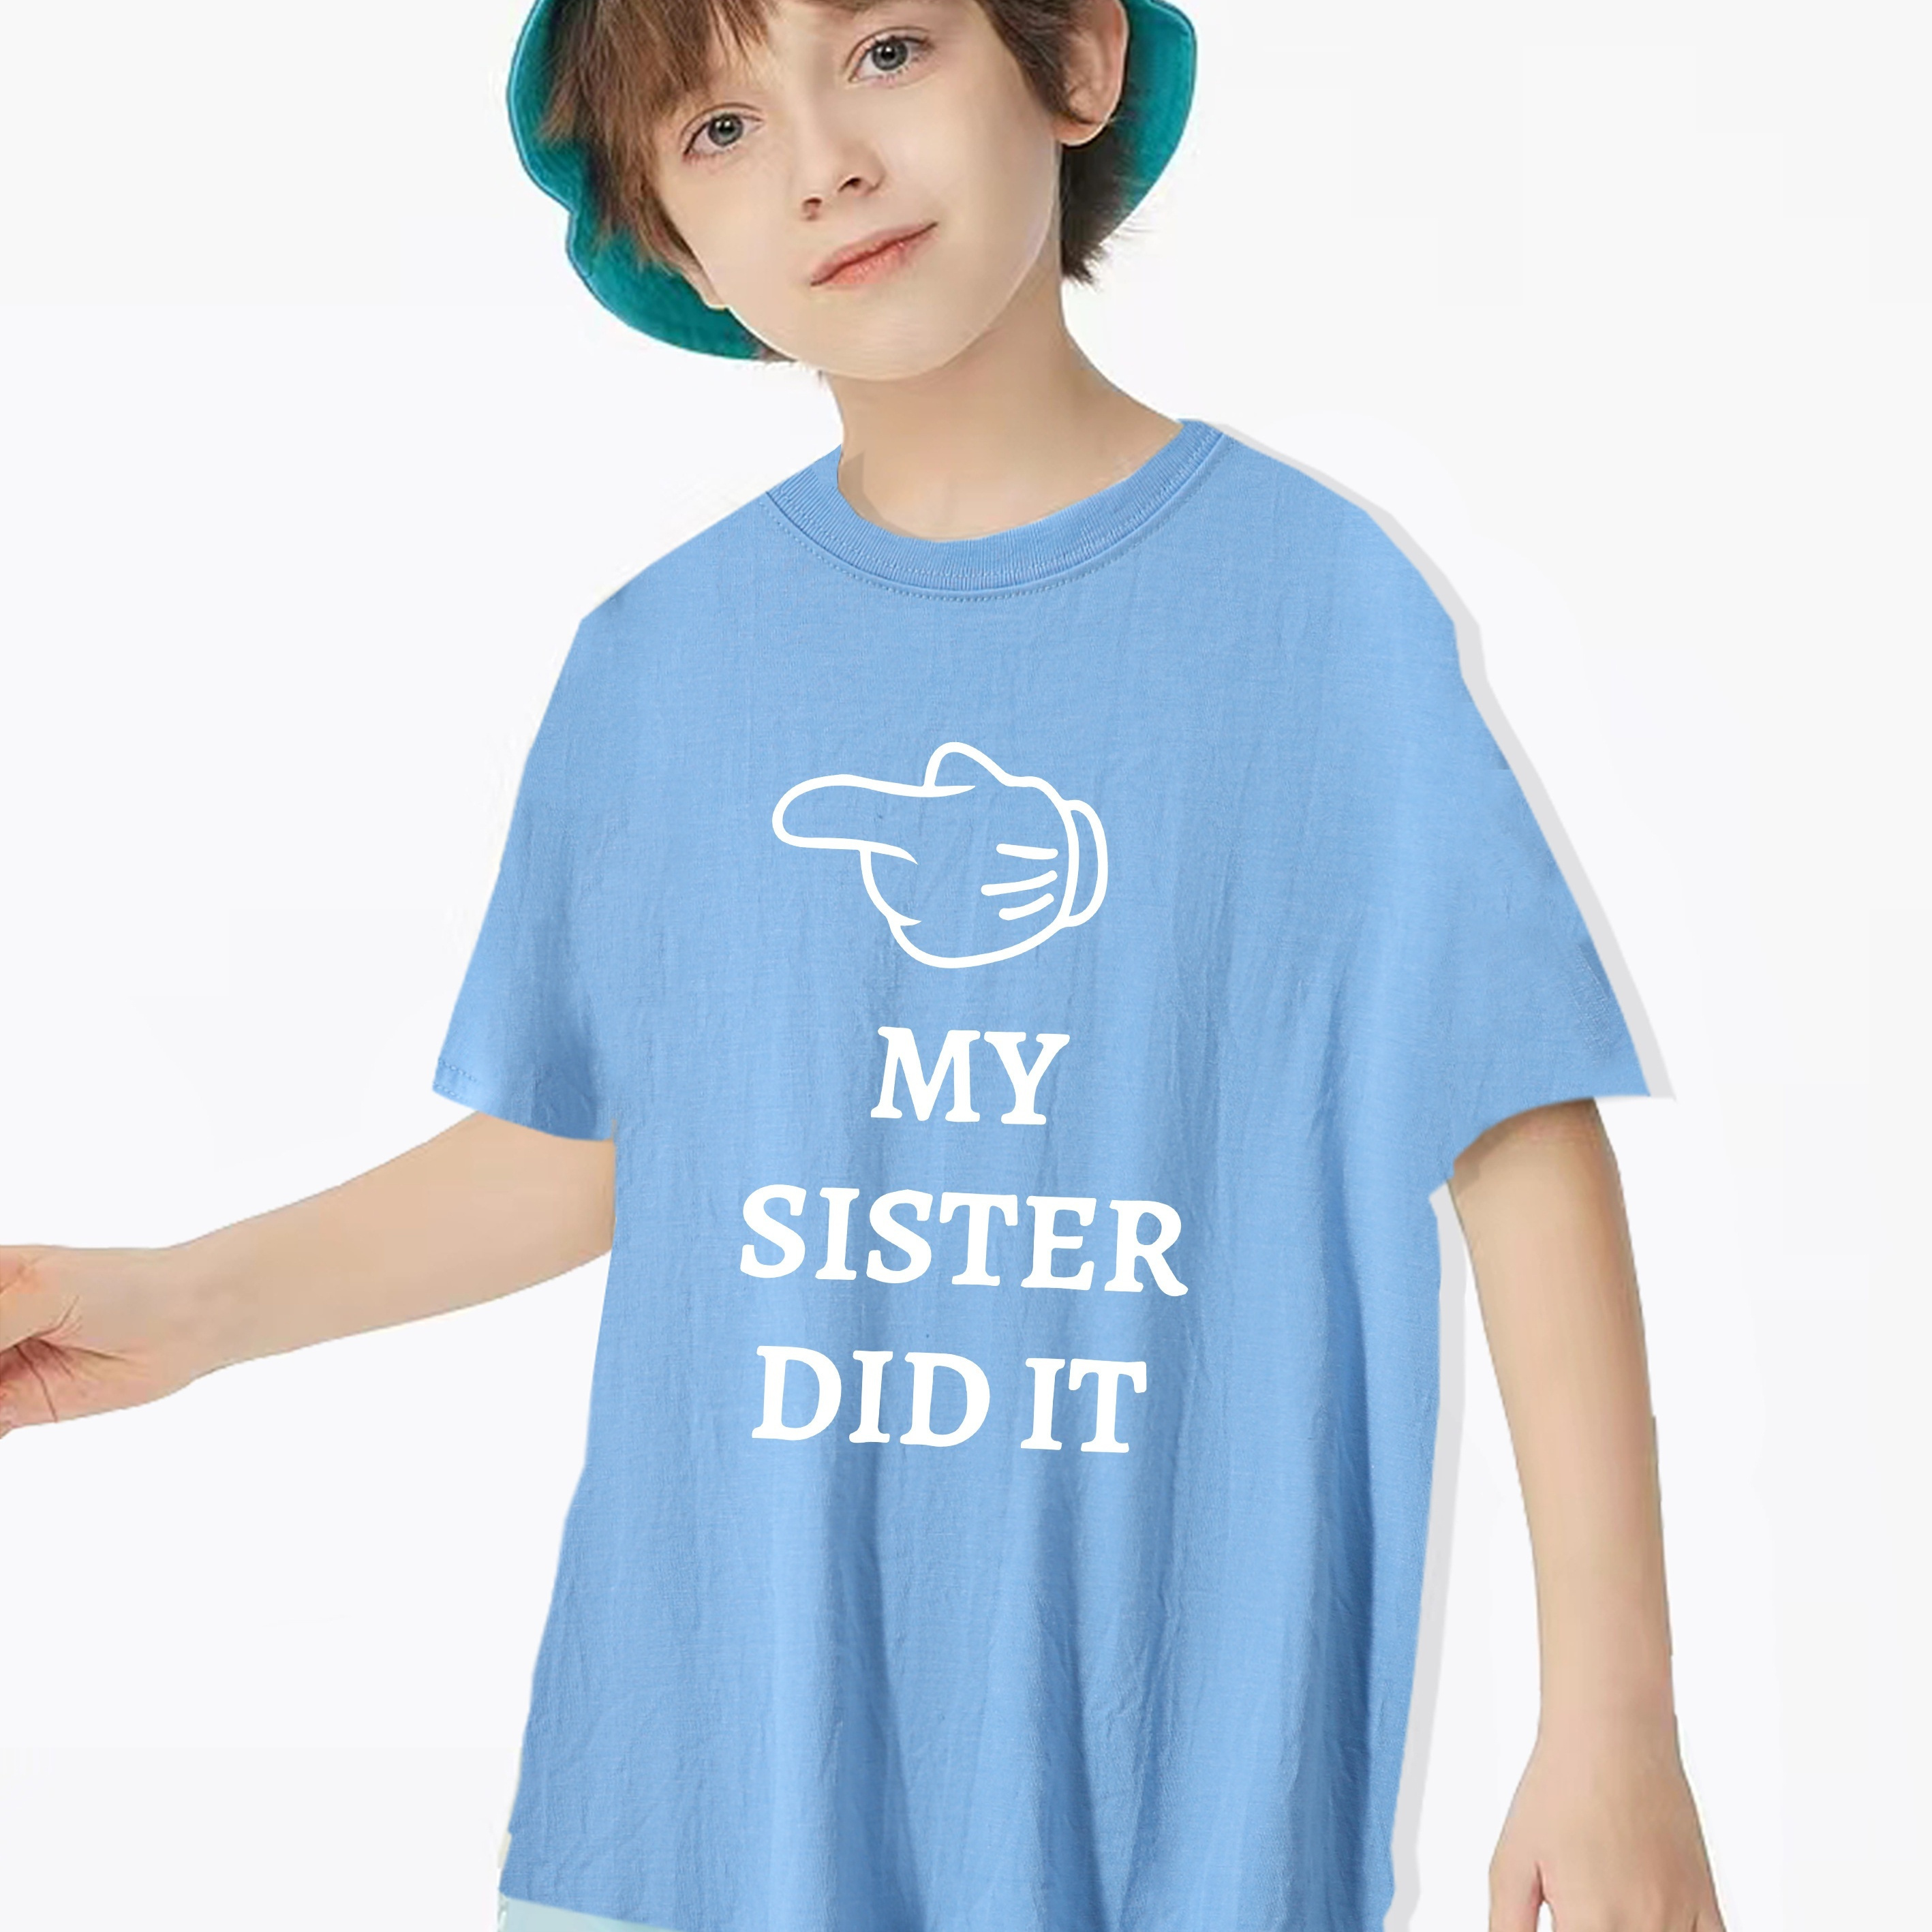 

My Sister Did It Print T-shirt For Boys, Casual Short Sleeve Top, Boy's Clothing